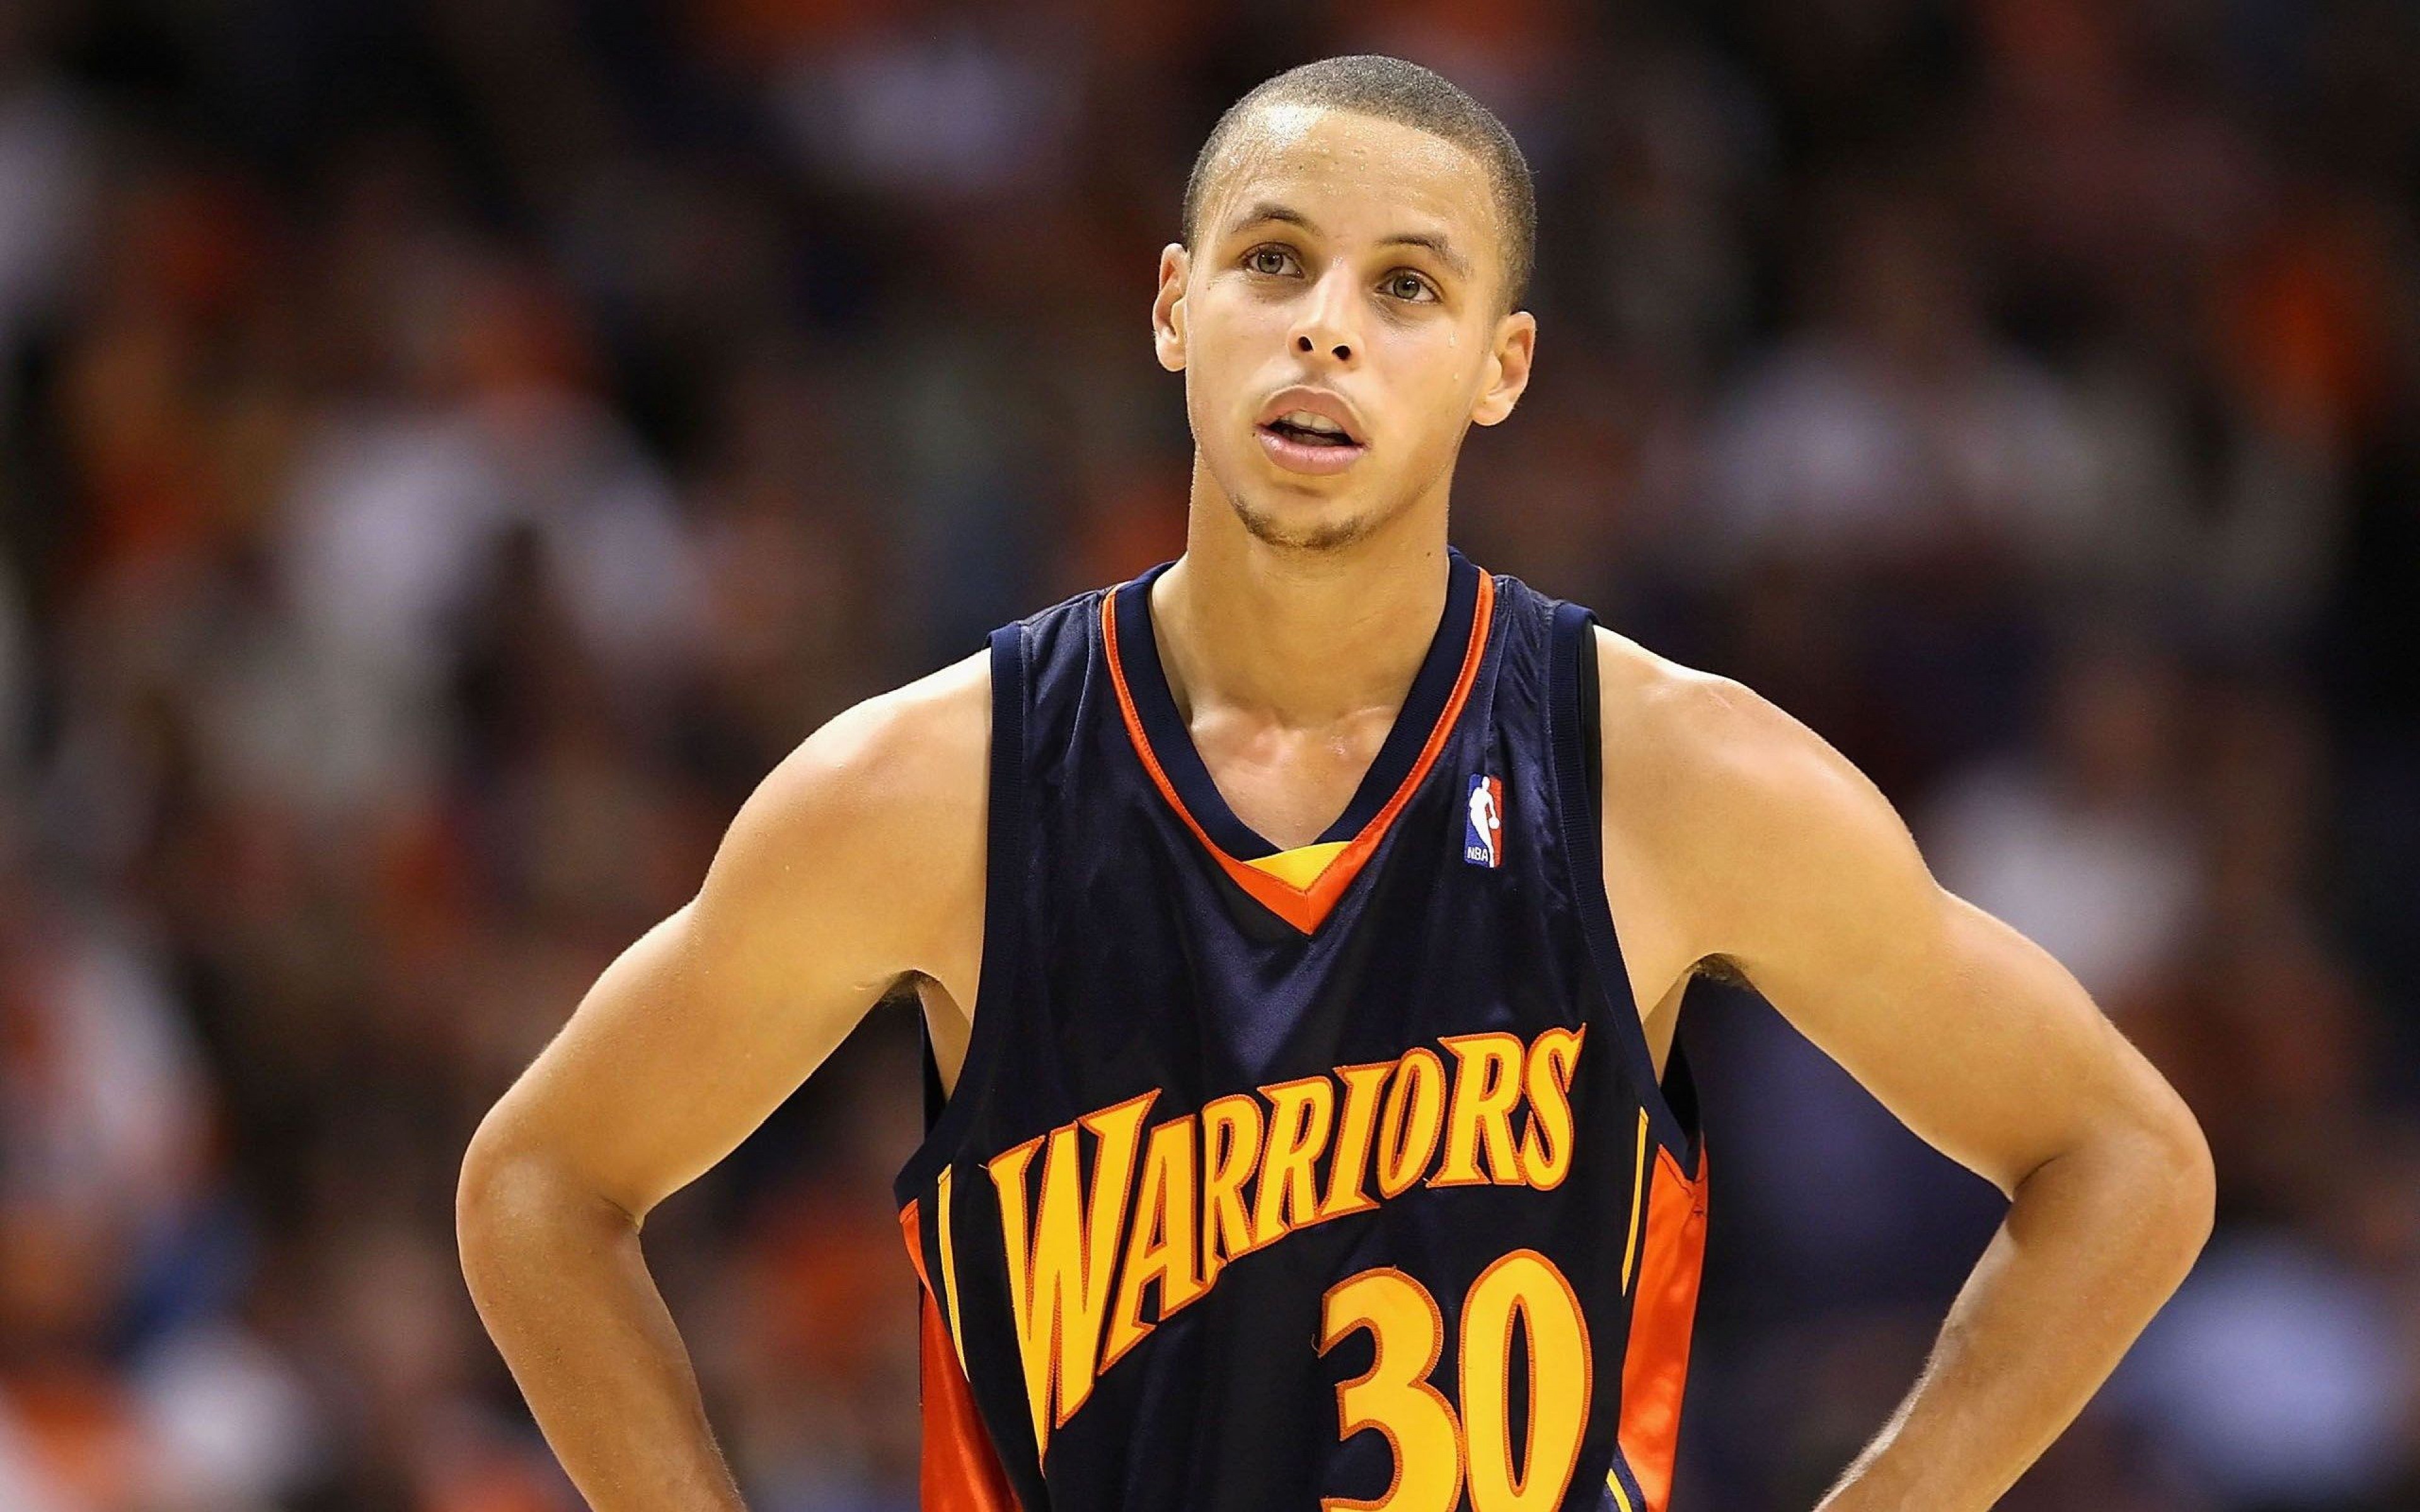 Stephen Curry Basketball Player 2015 Wallpaper   New HD Wallpapers